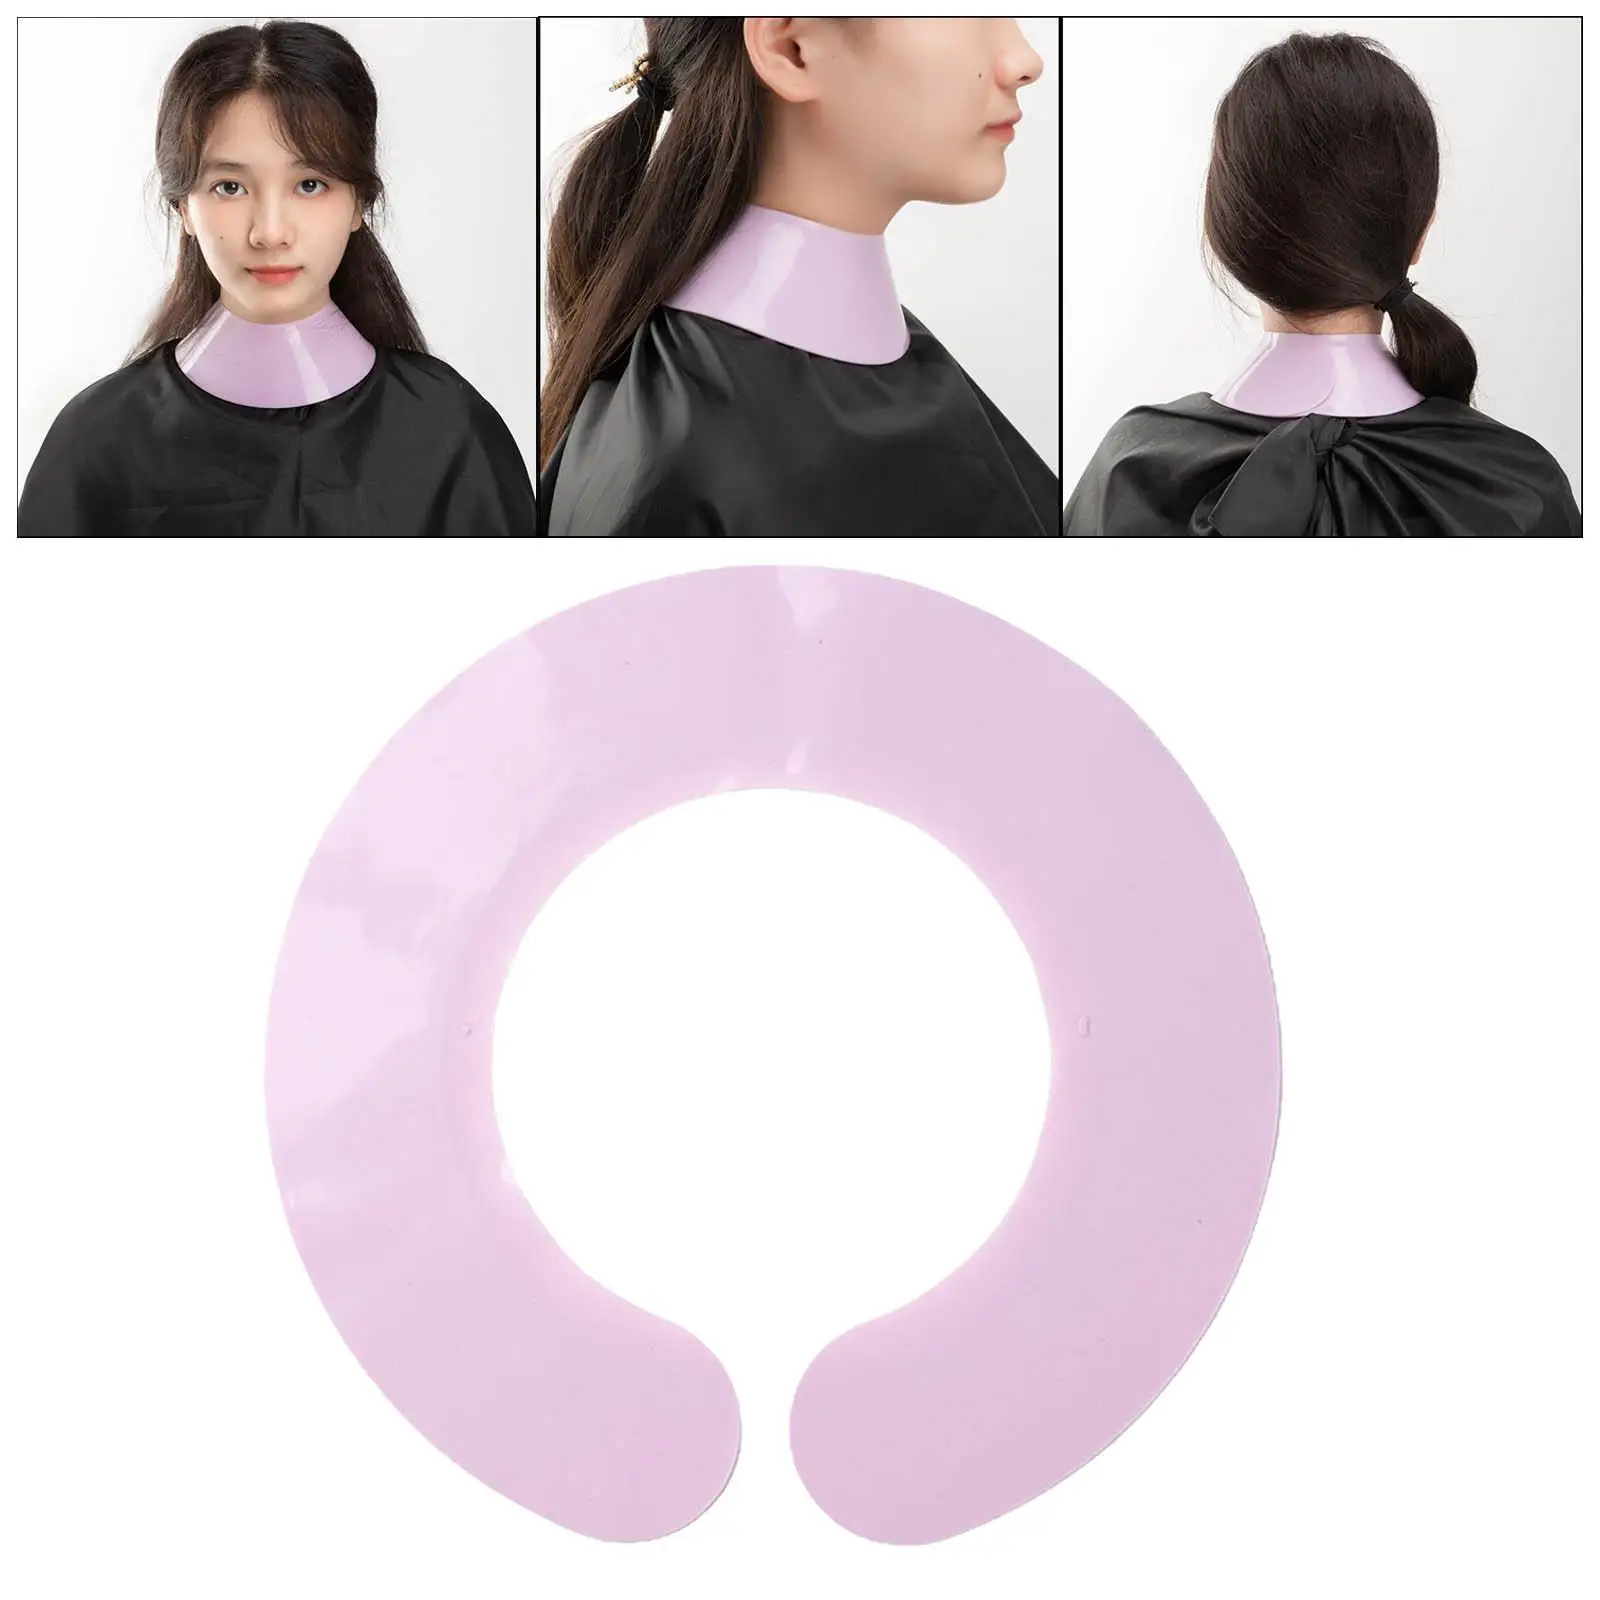 Professional Hair Cutting Collar Silicone Neck Shield Neck Wrap for Hair Dye Haircut Hairdressing for Adults Kids Neck Shawl